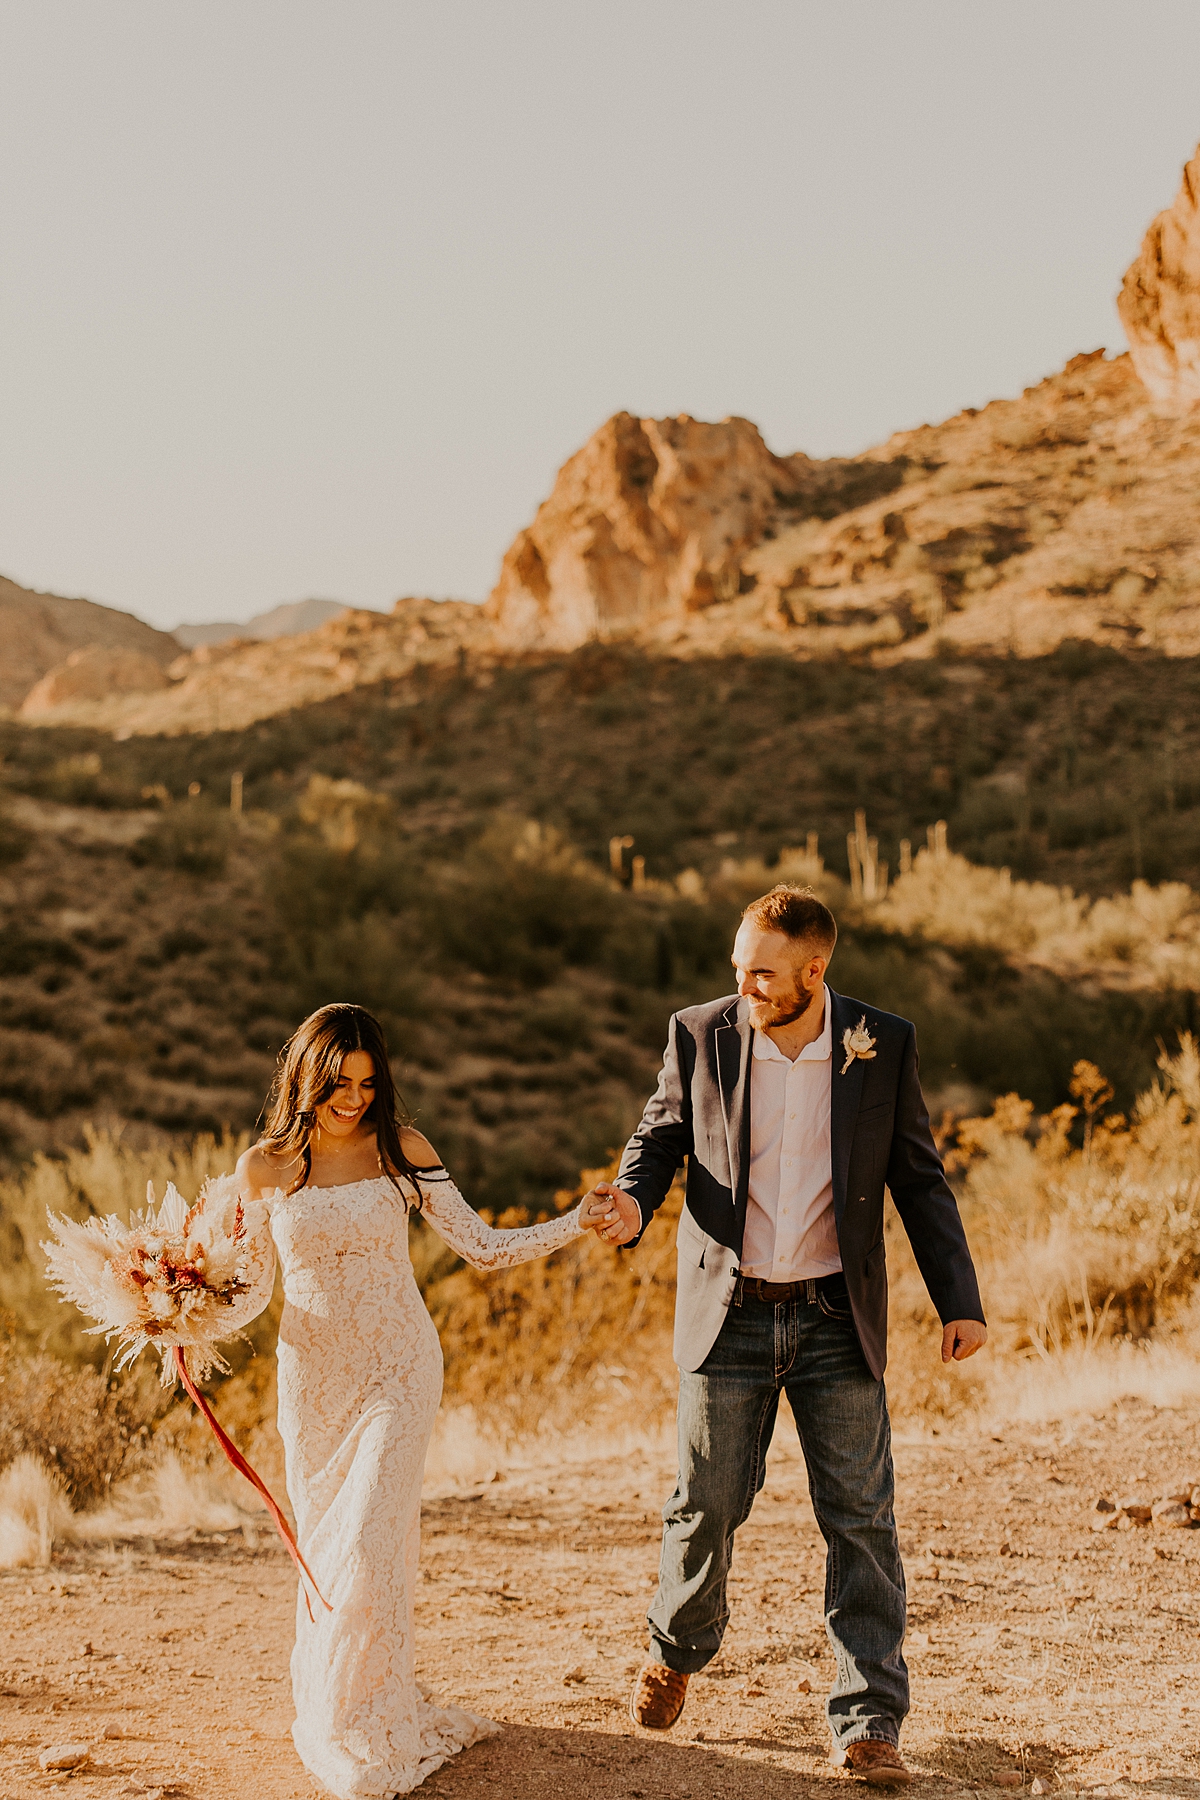 Intimate-elopement-in-superstition-mountain-wilderness-allison-slater-photography49.jpg